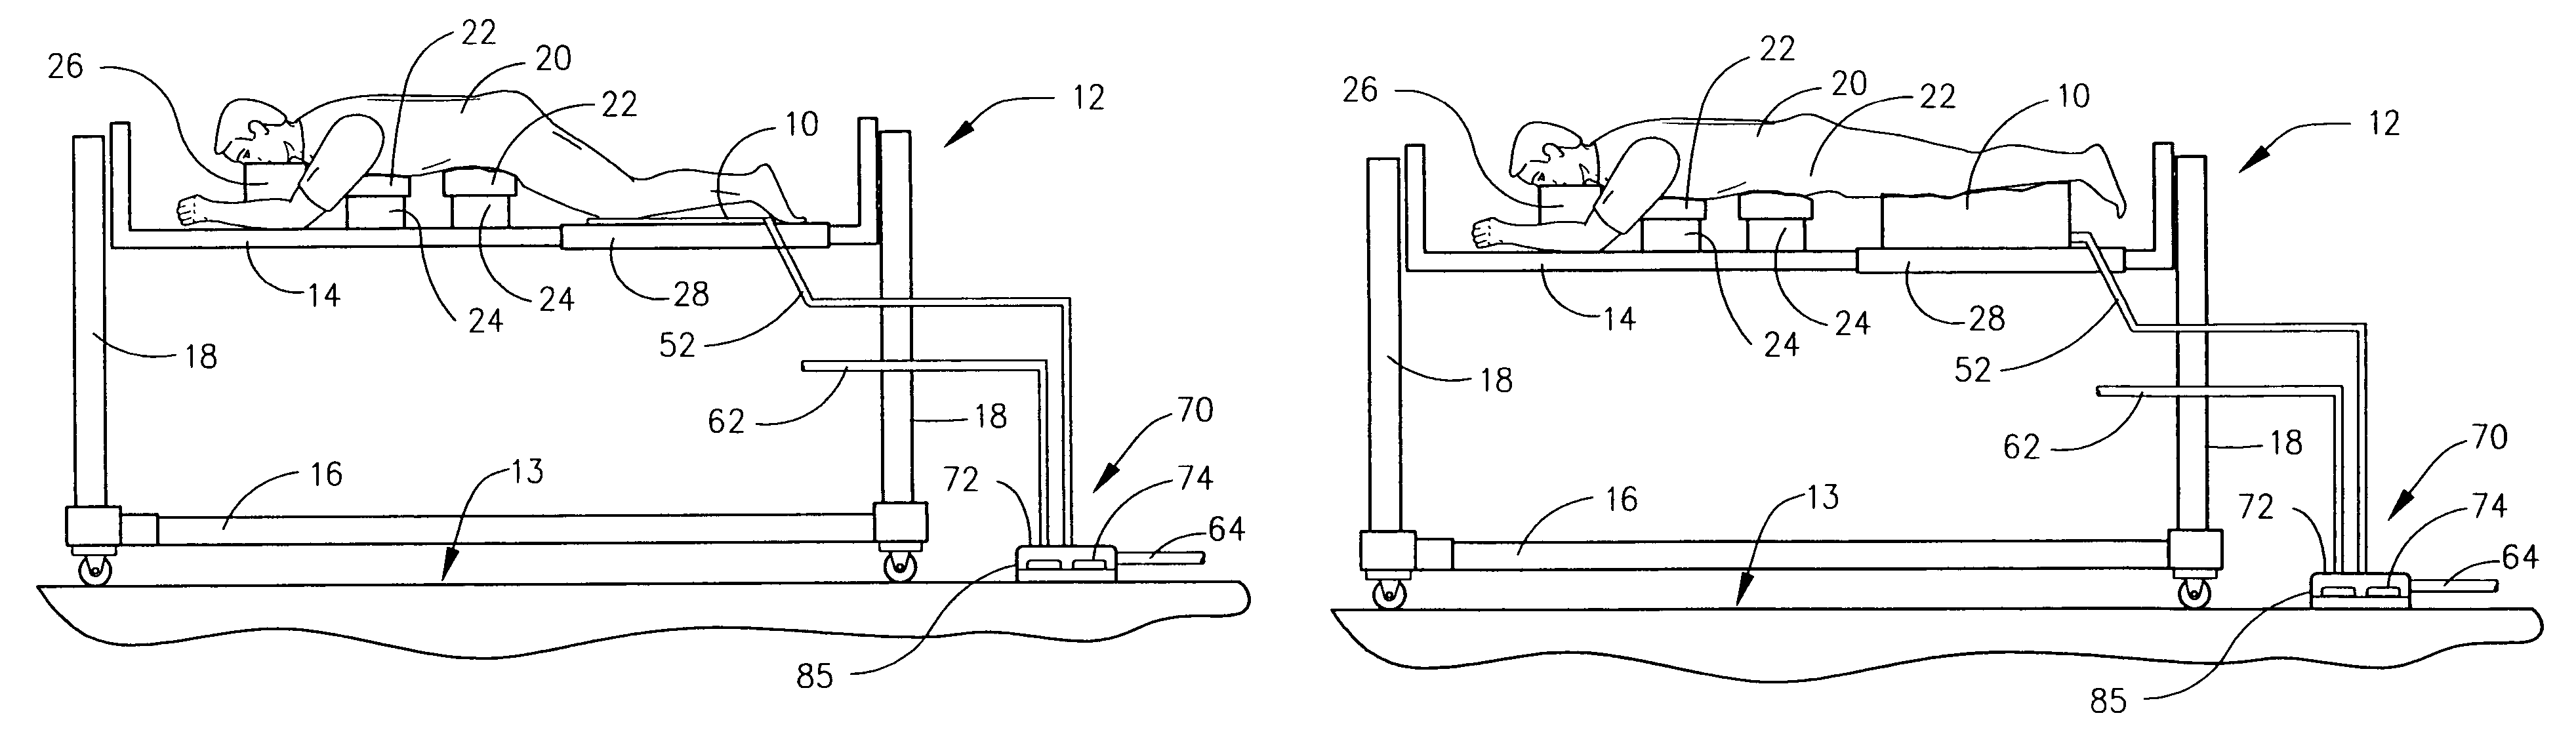 Inflatable cushion apparatus for use in surgical procedures and surgical method utilizing the same